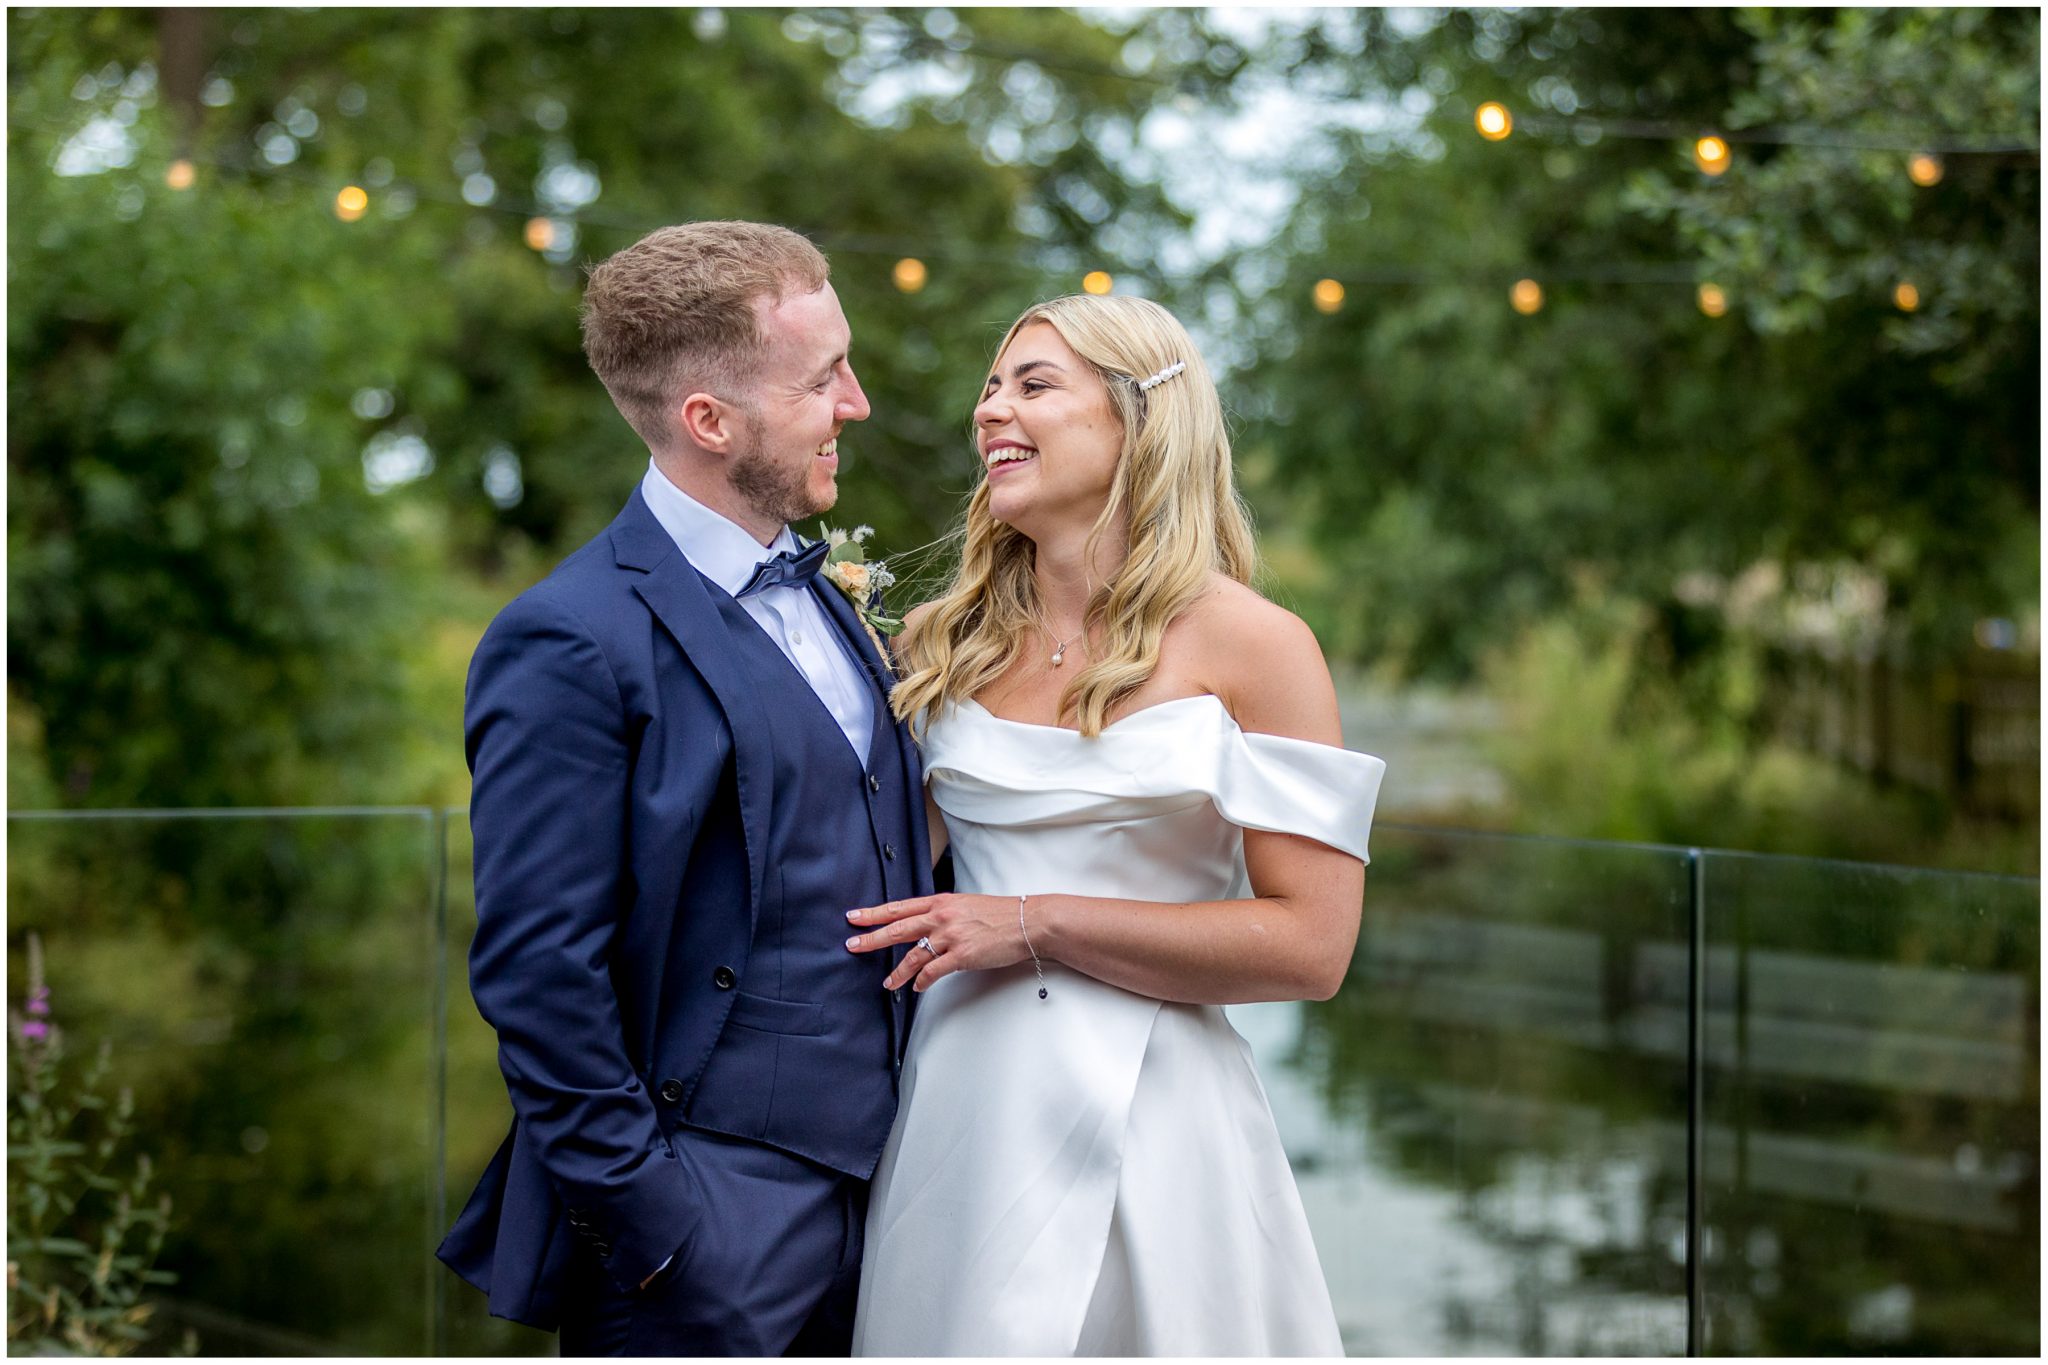 Colour photograph of couple by the river laughing